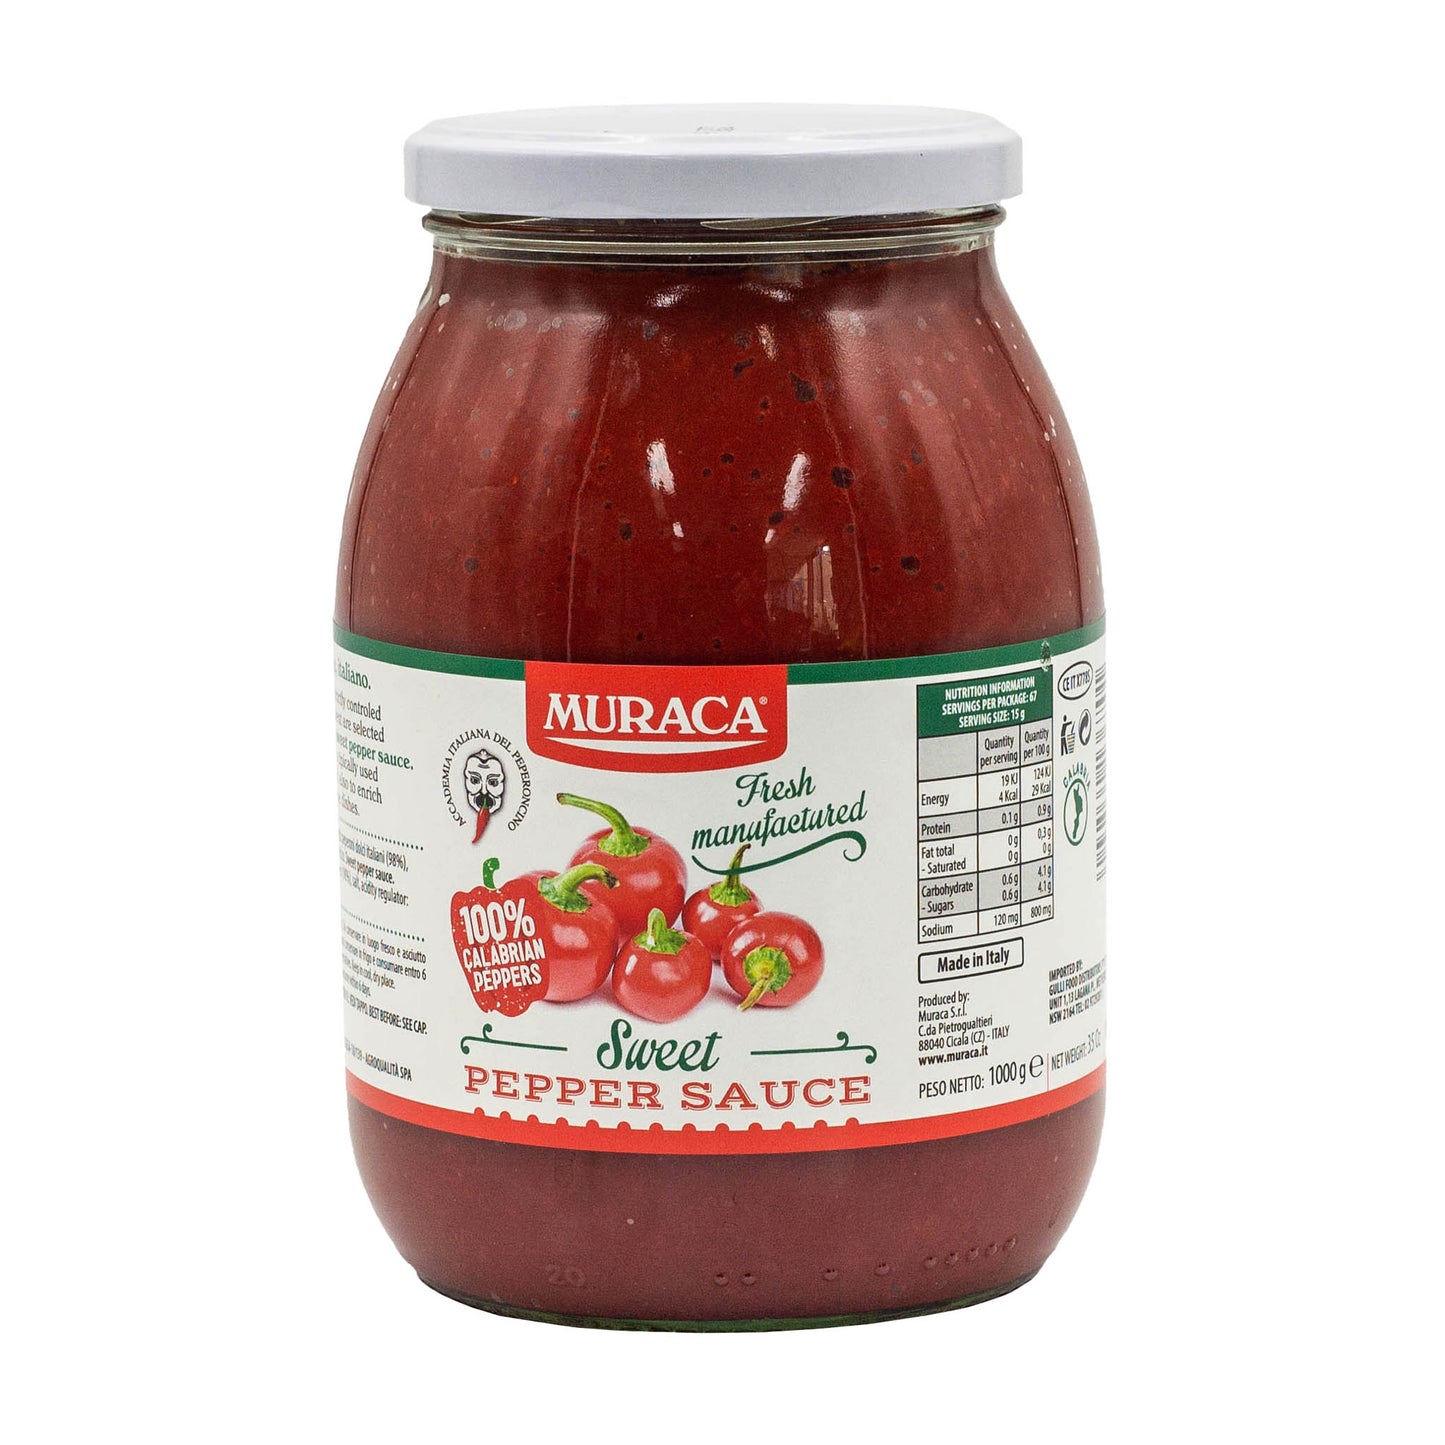 1kg Italian made Muraca sweet pepper sauce, made is Calabrian peppers for salami making, pasta sauces and more